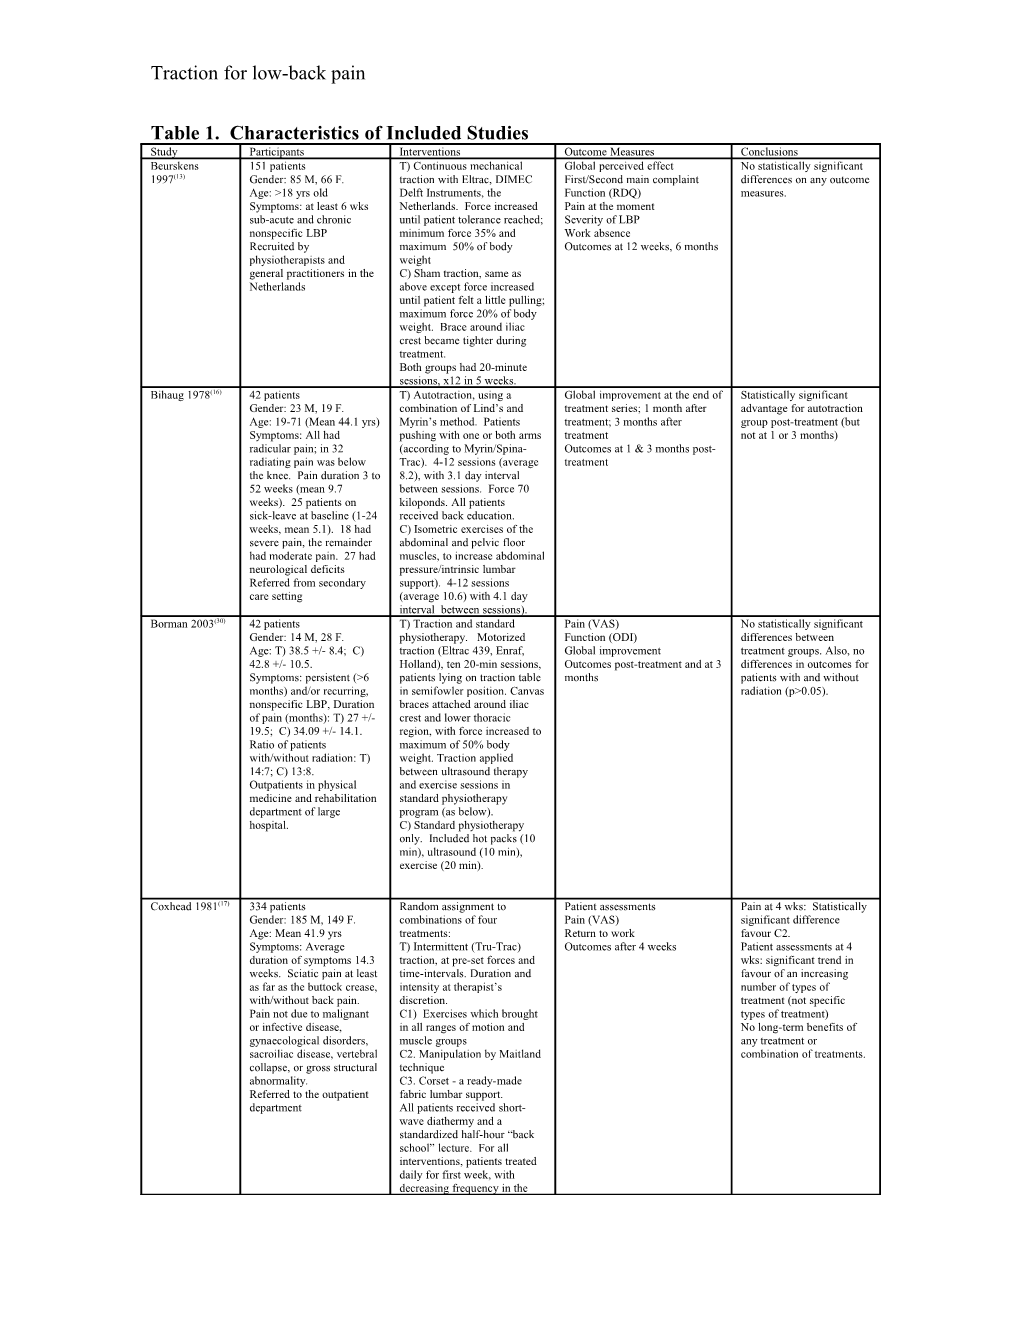 Table 1. Characteristics of Included Studies